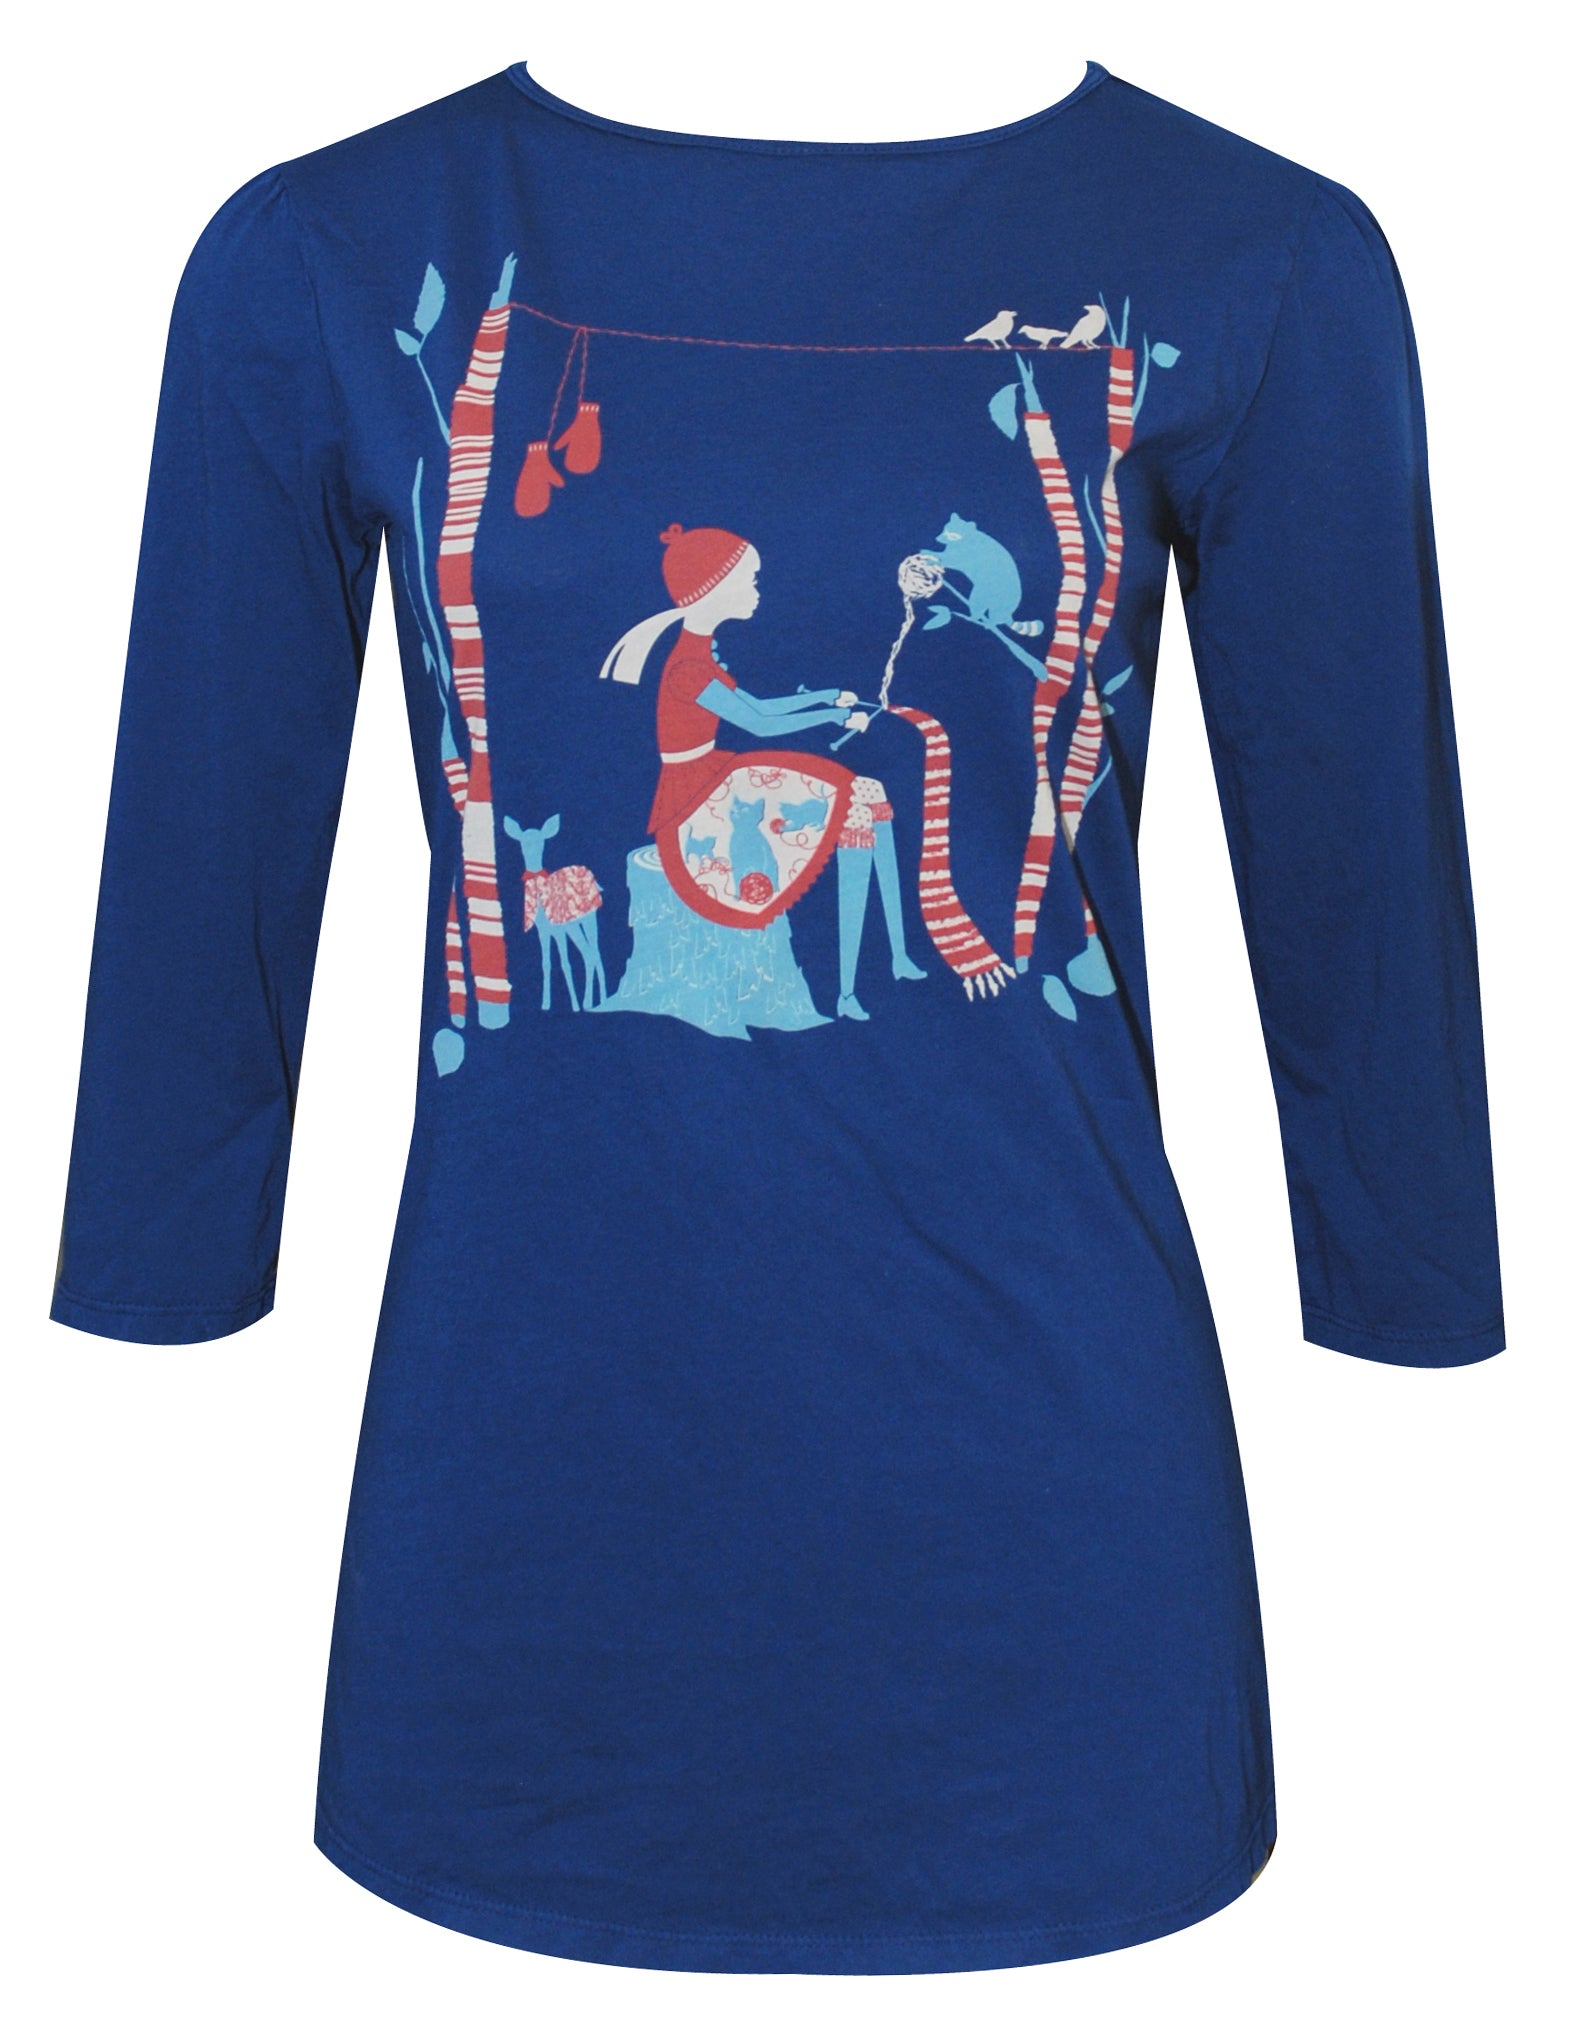 Navy blue 3/4 sleeved tee with print of knitting girl in the woods with animals and yarn